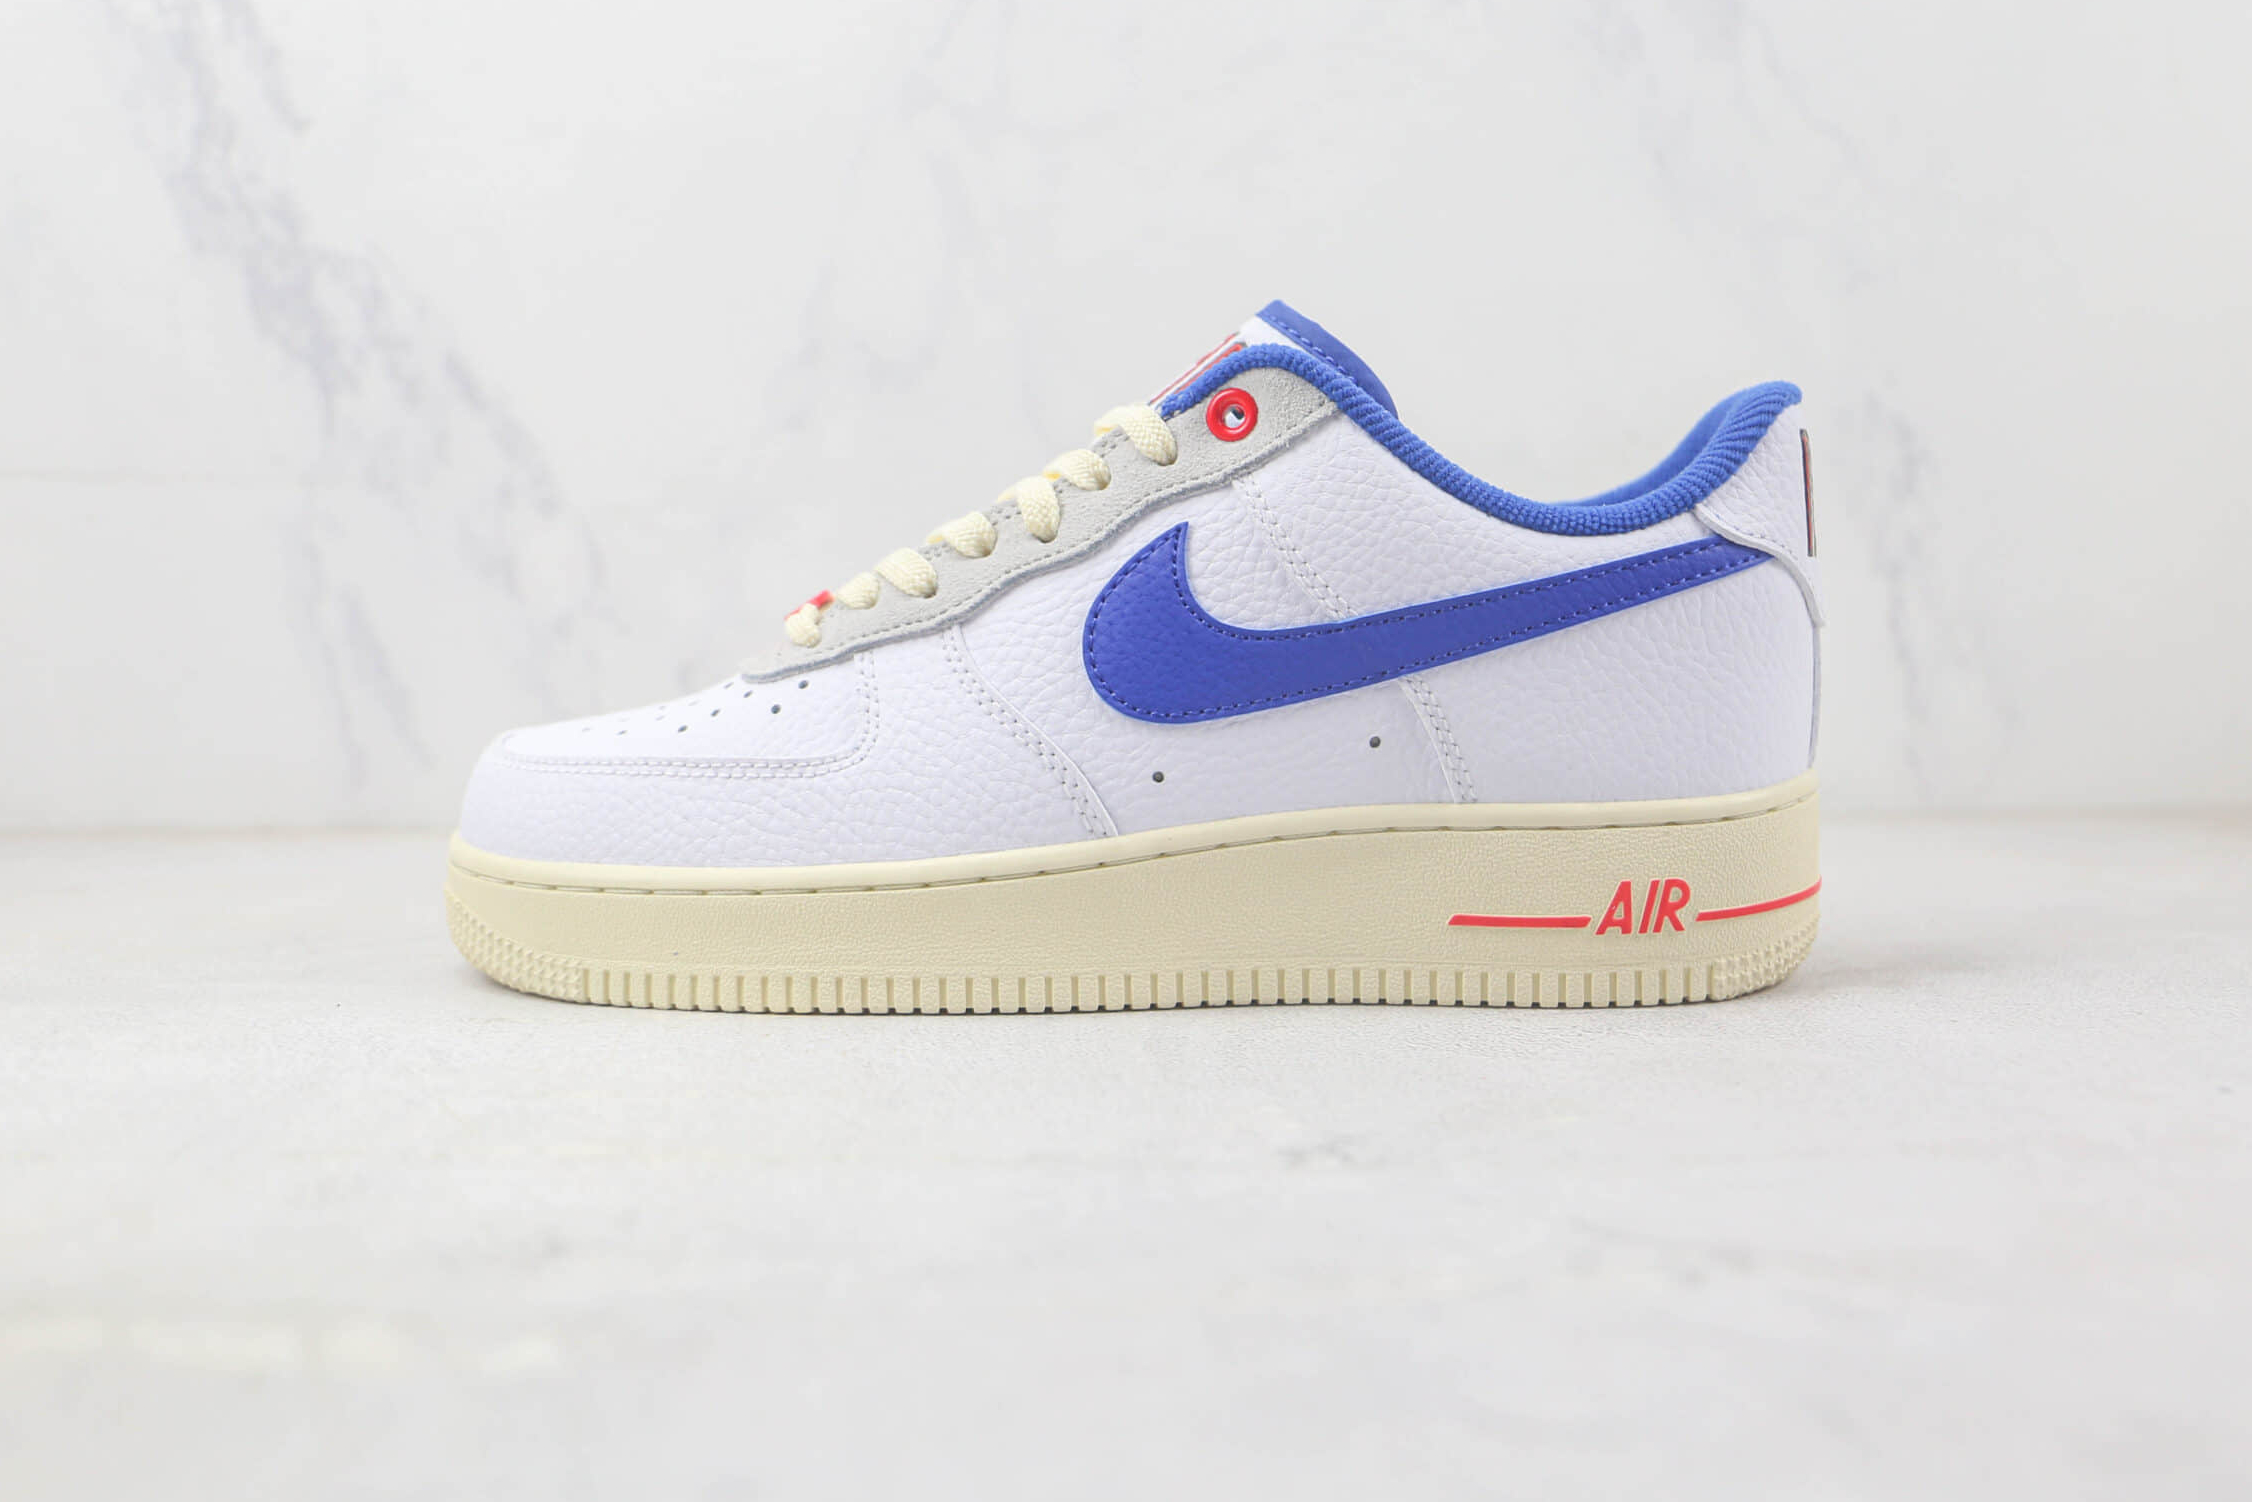 Nike Air Force 1 '07 'Command Force' DR0148-100: Timeless Style and Iconic Design